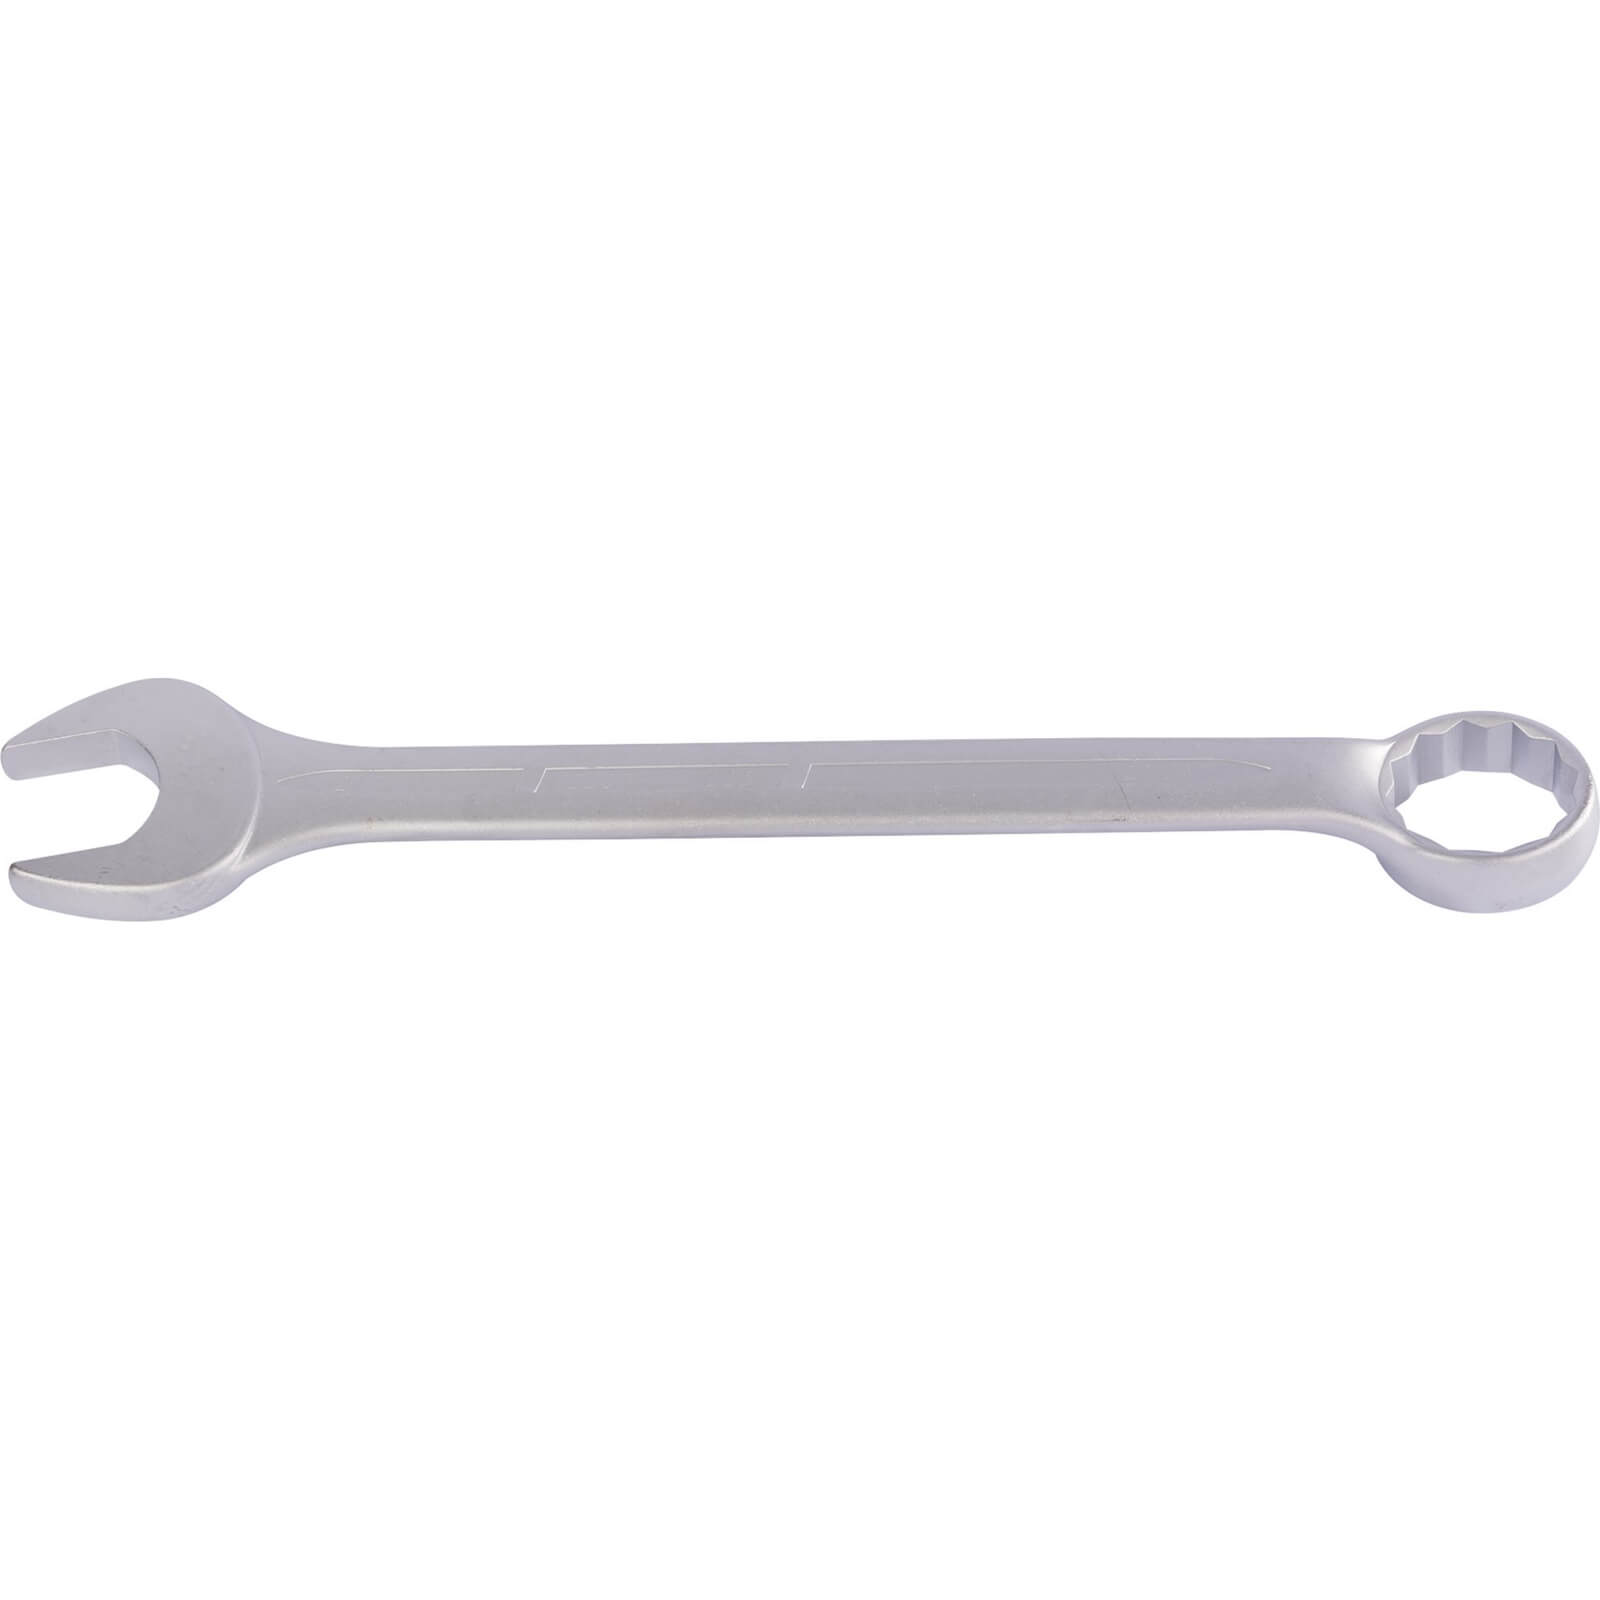 Photo of Elora Long Combination Spanner Imperial 2